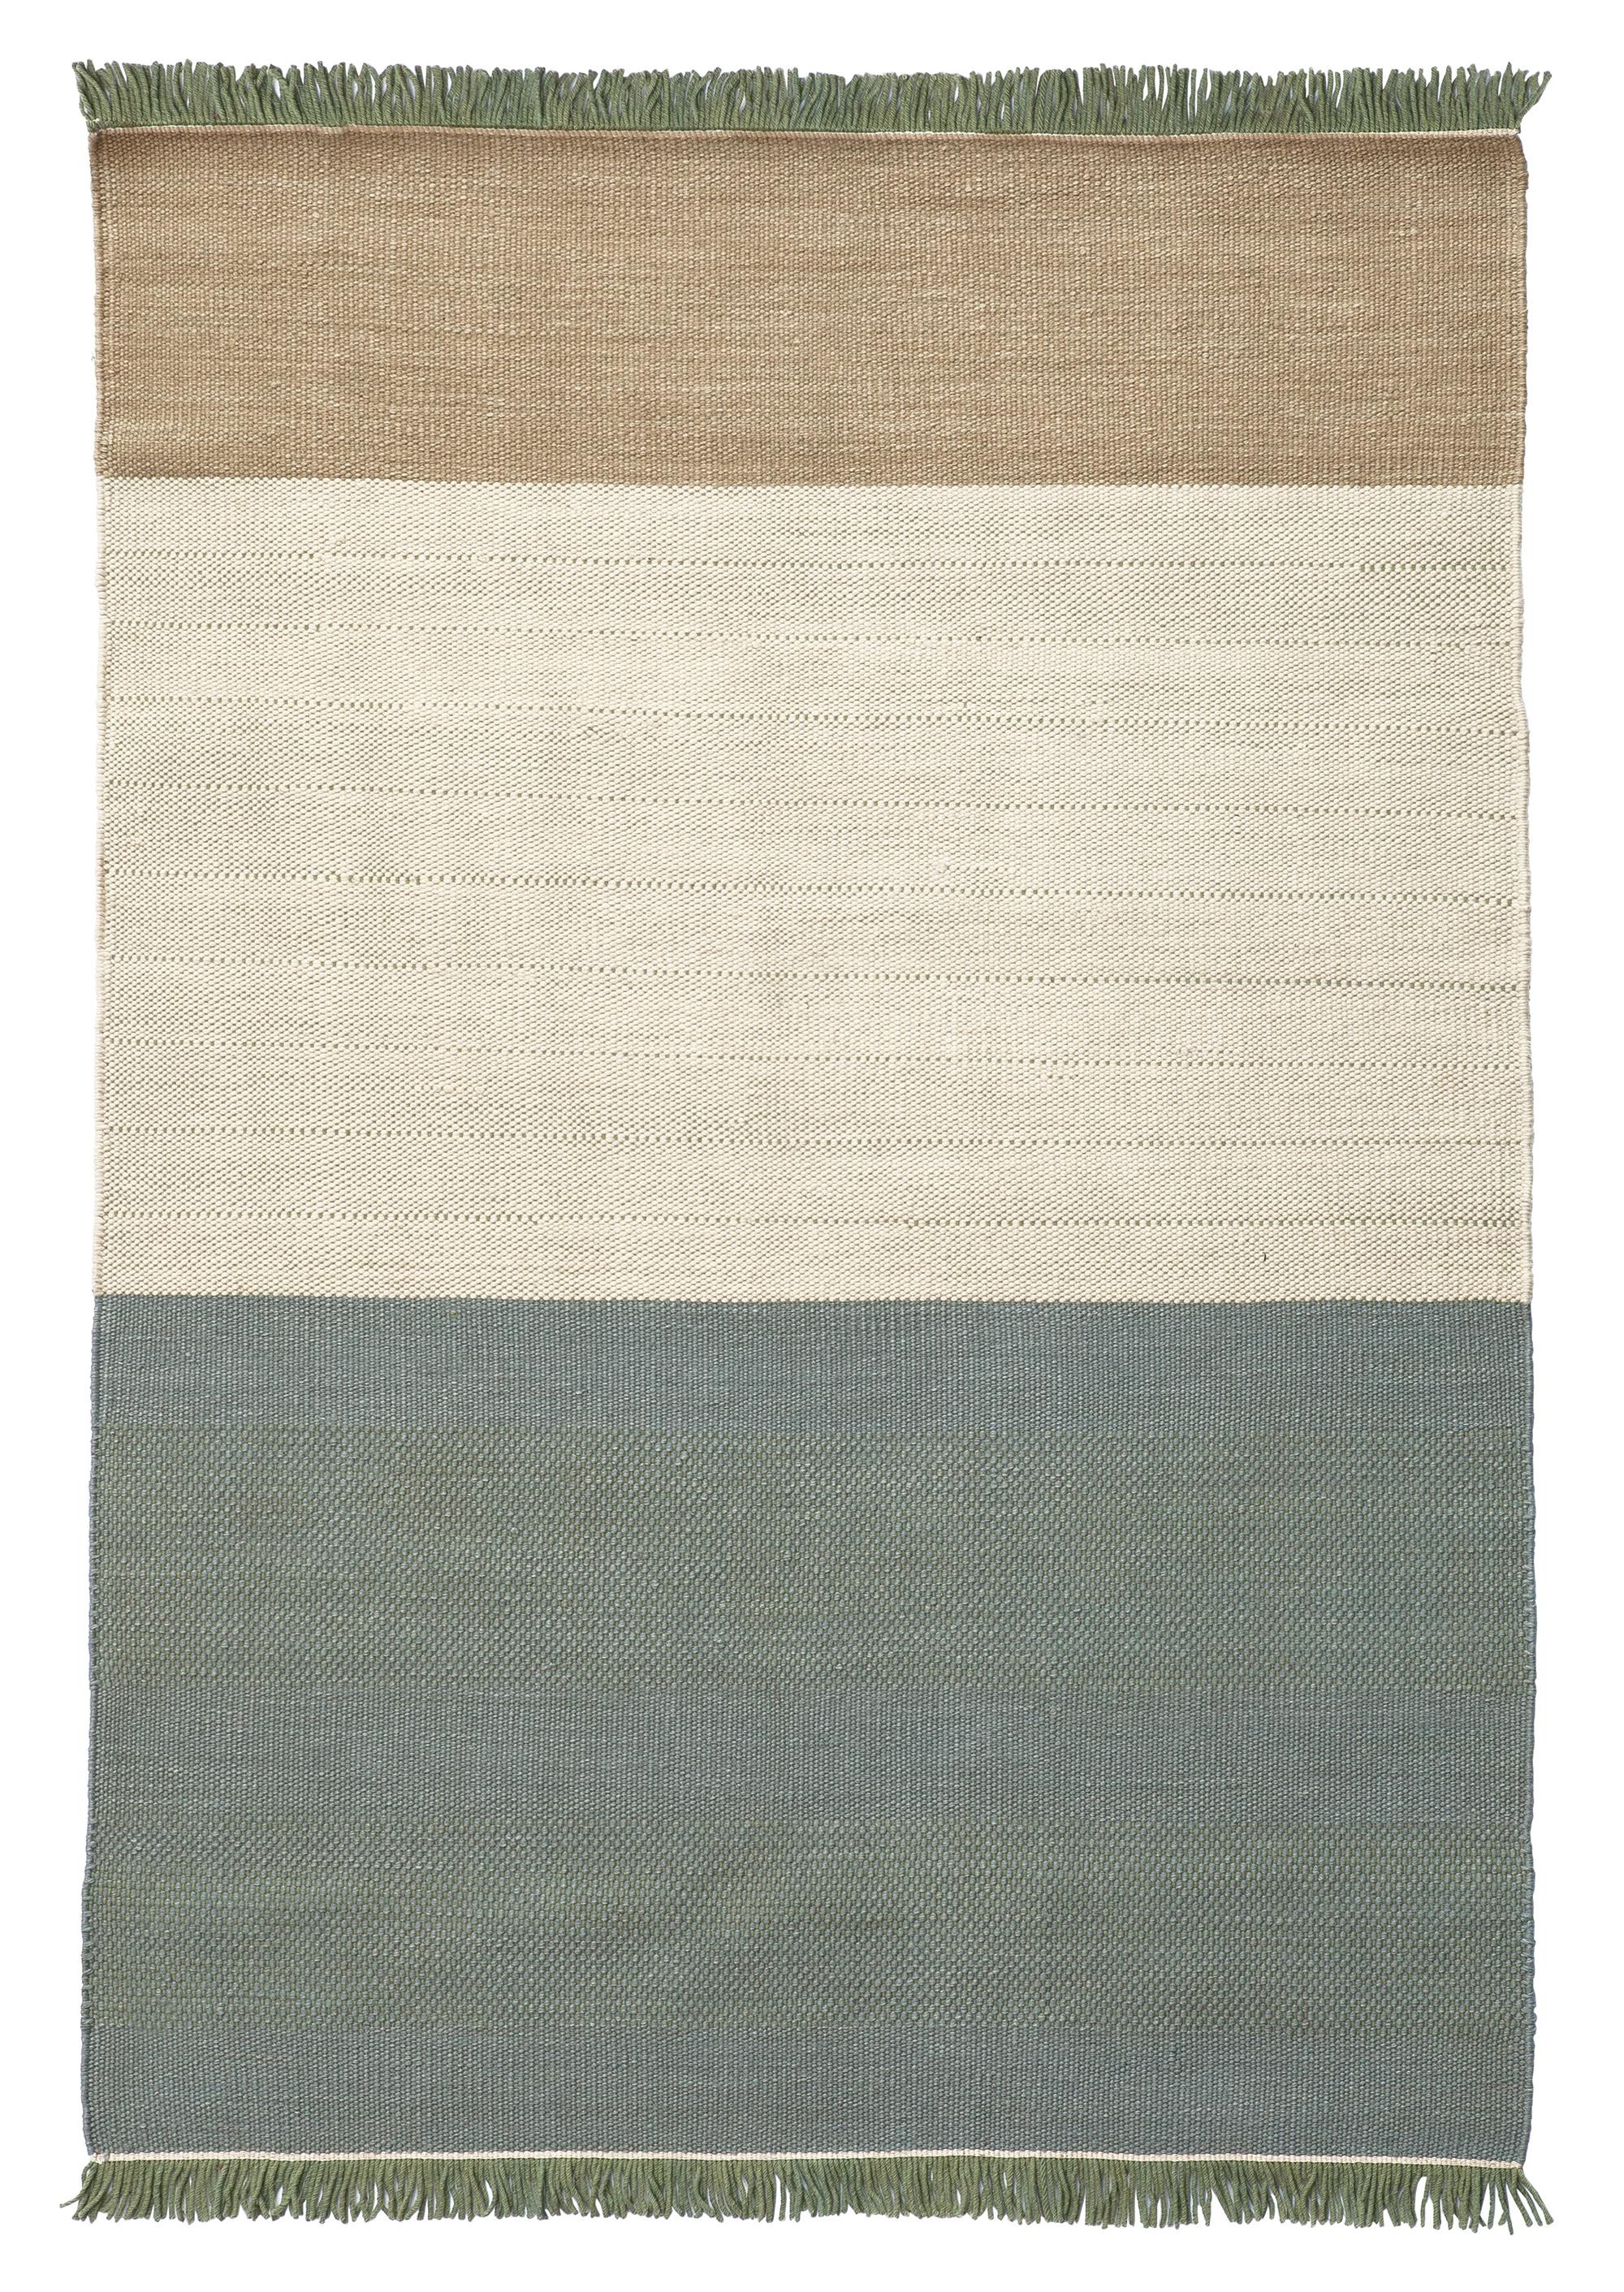 Wool Small 'Tres Stripes' Hand-Loomed Rug for Nanimarquina For Sale